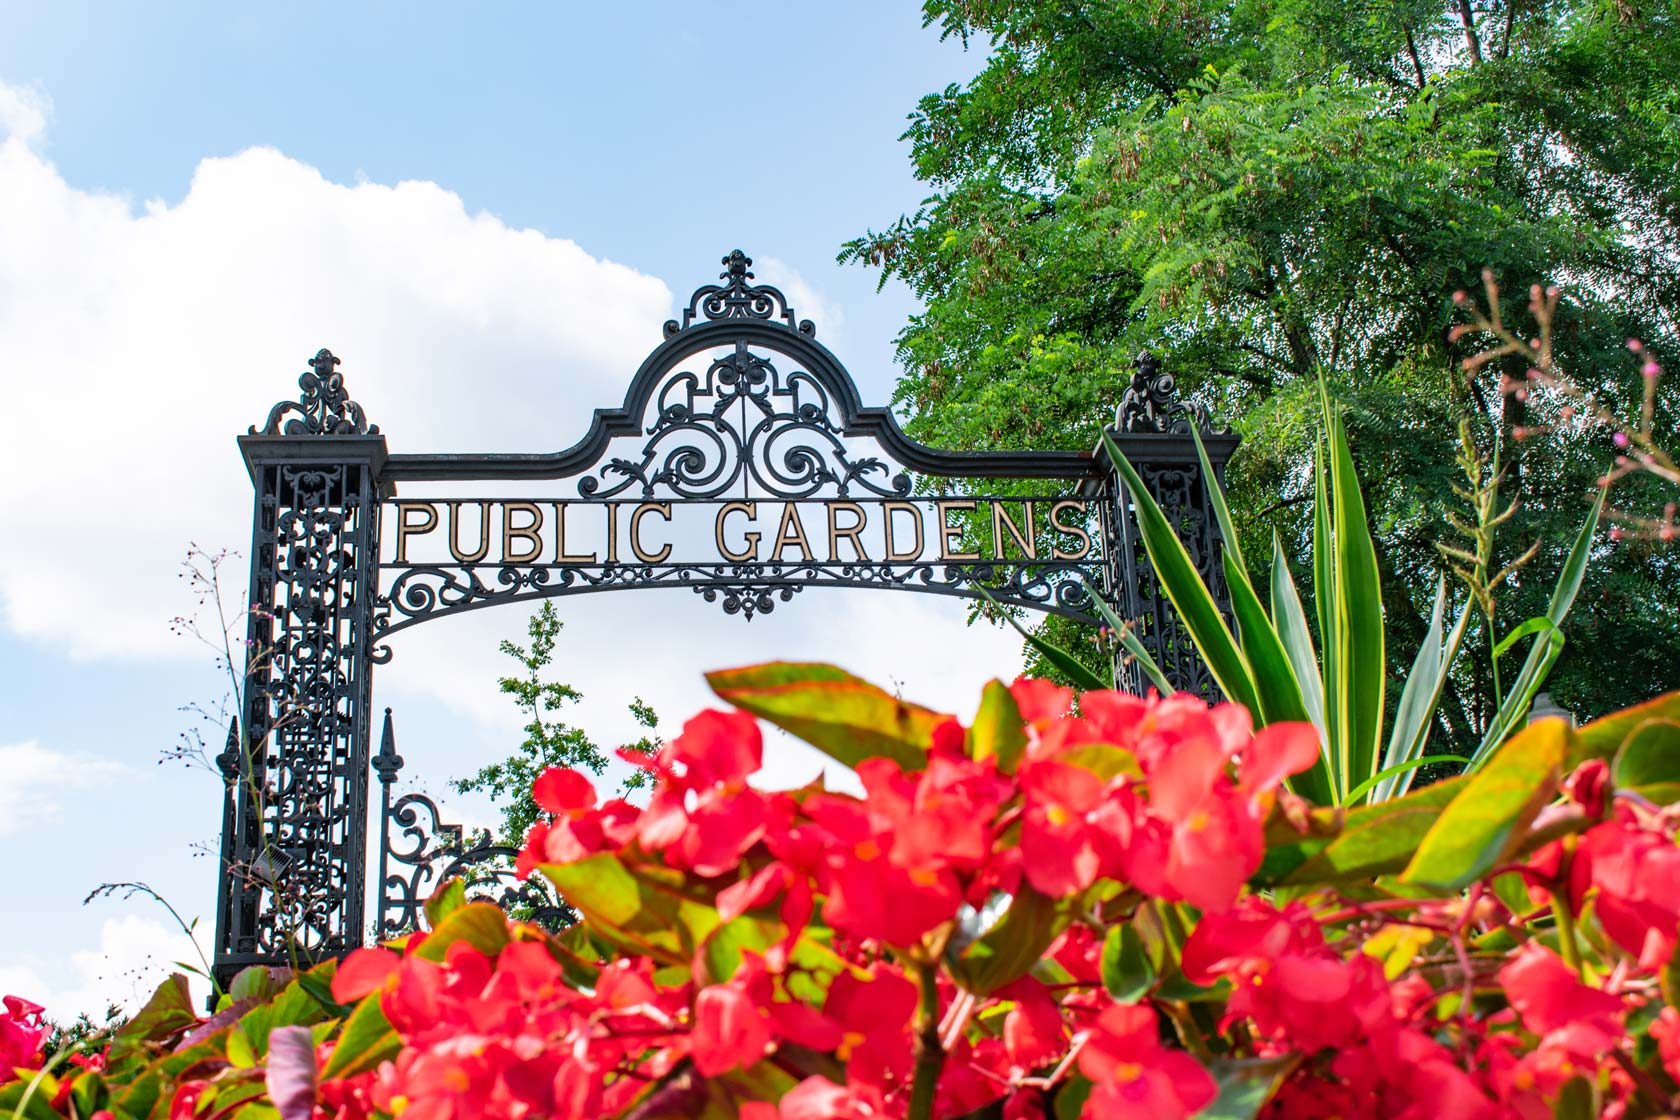 The entrance of Public Gardens in Halifax